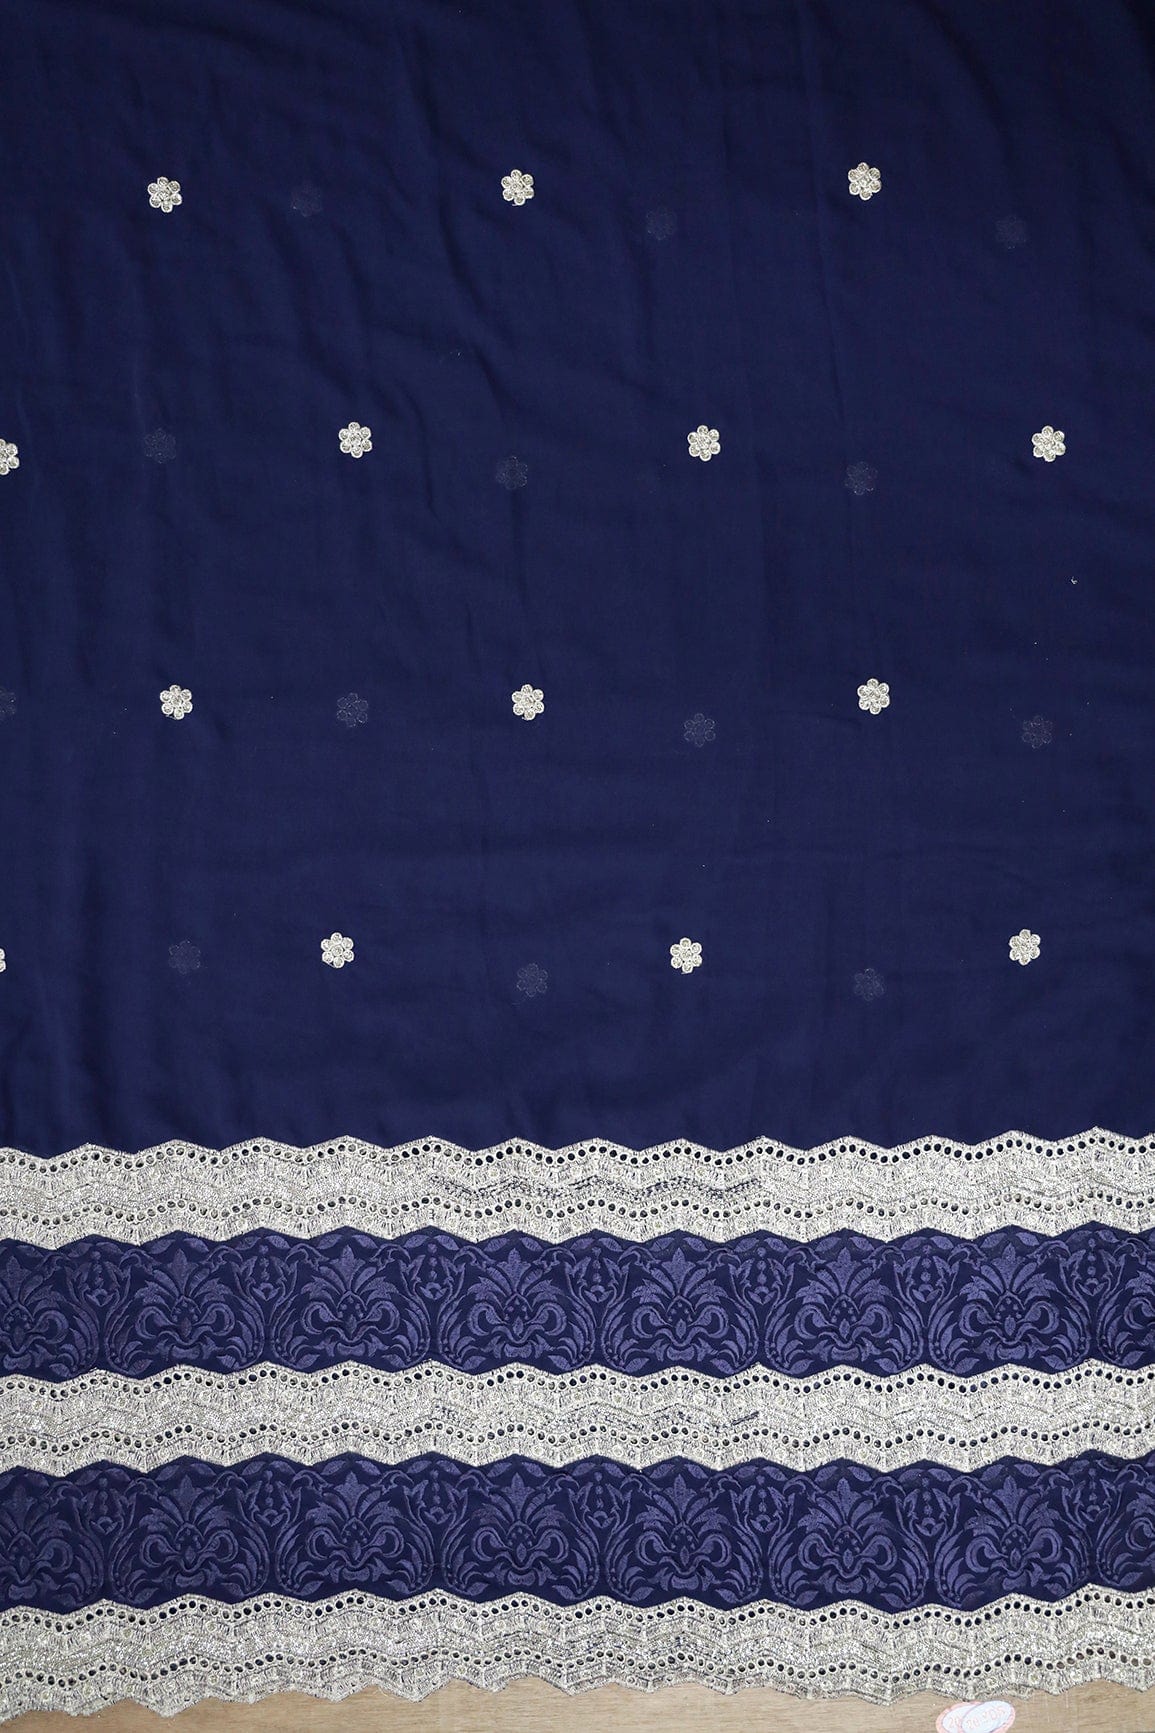 doeraa Embroidery Fabrics Big Width''56'' Blue Thread With Zari Ethnic Embroidery Work On Navy Blue Georgette Fabric With Border